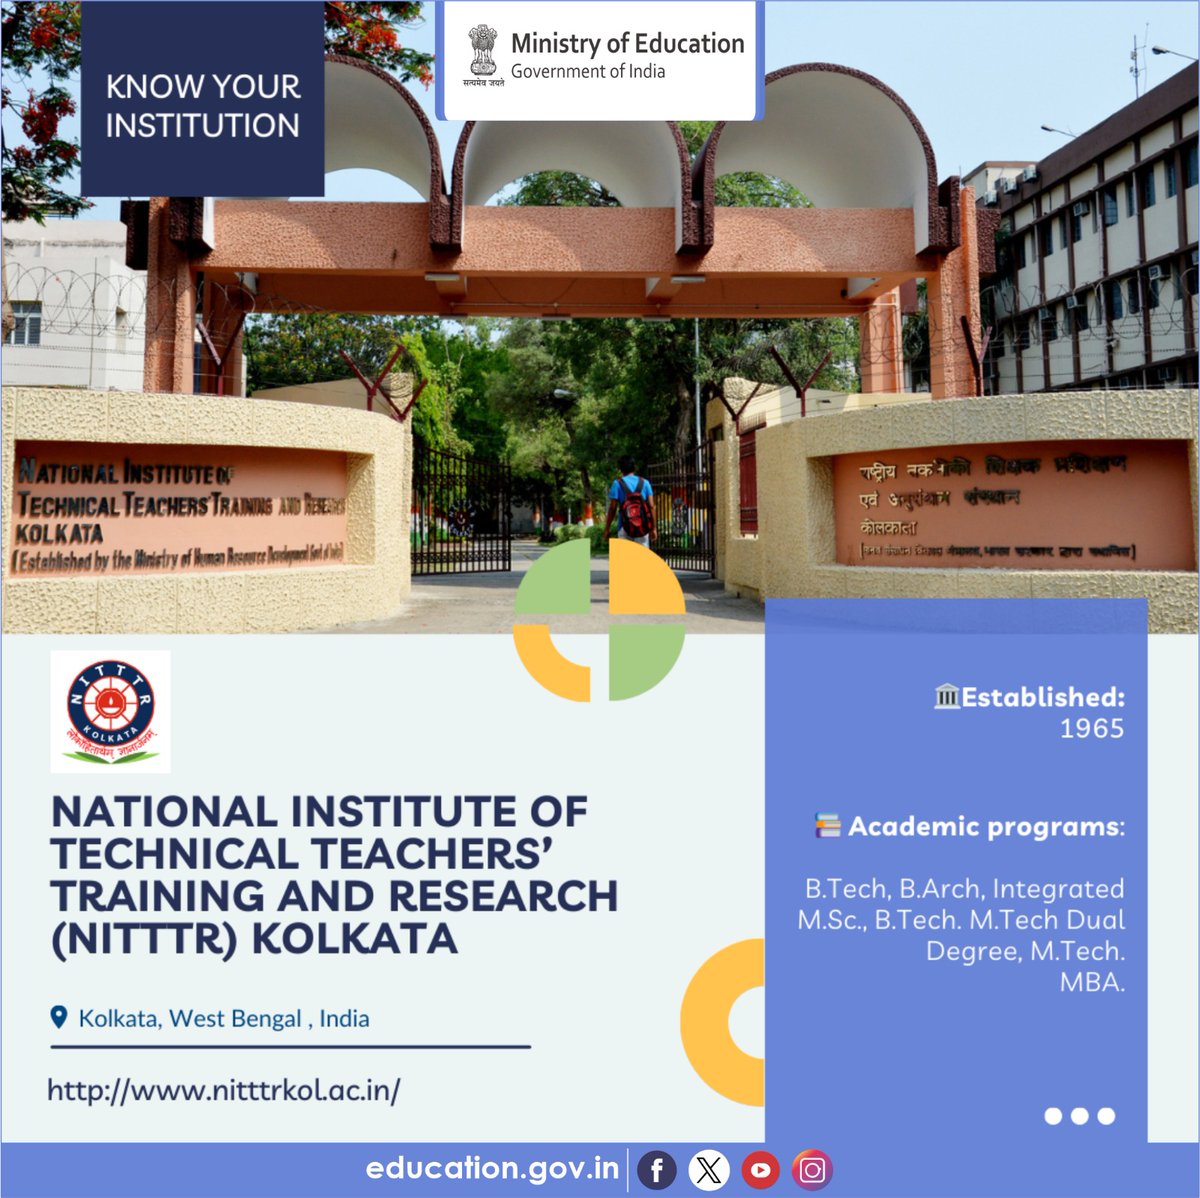 Know about the HEIs of India! National Institute of Technical Teachers’ Training and Research, Kolkata, West Bengal Established in 1965 as the Technical Teachers' Training Institute (TTTI) in the Eastern Region, it has become a centre for learning and research, earning the